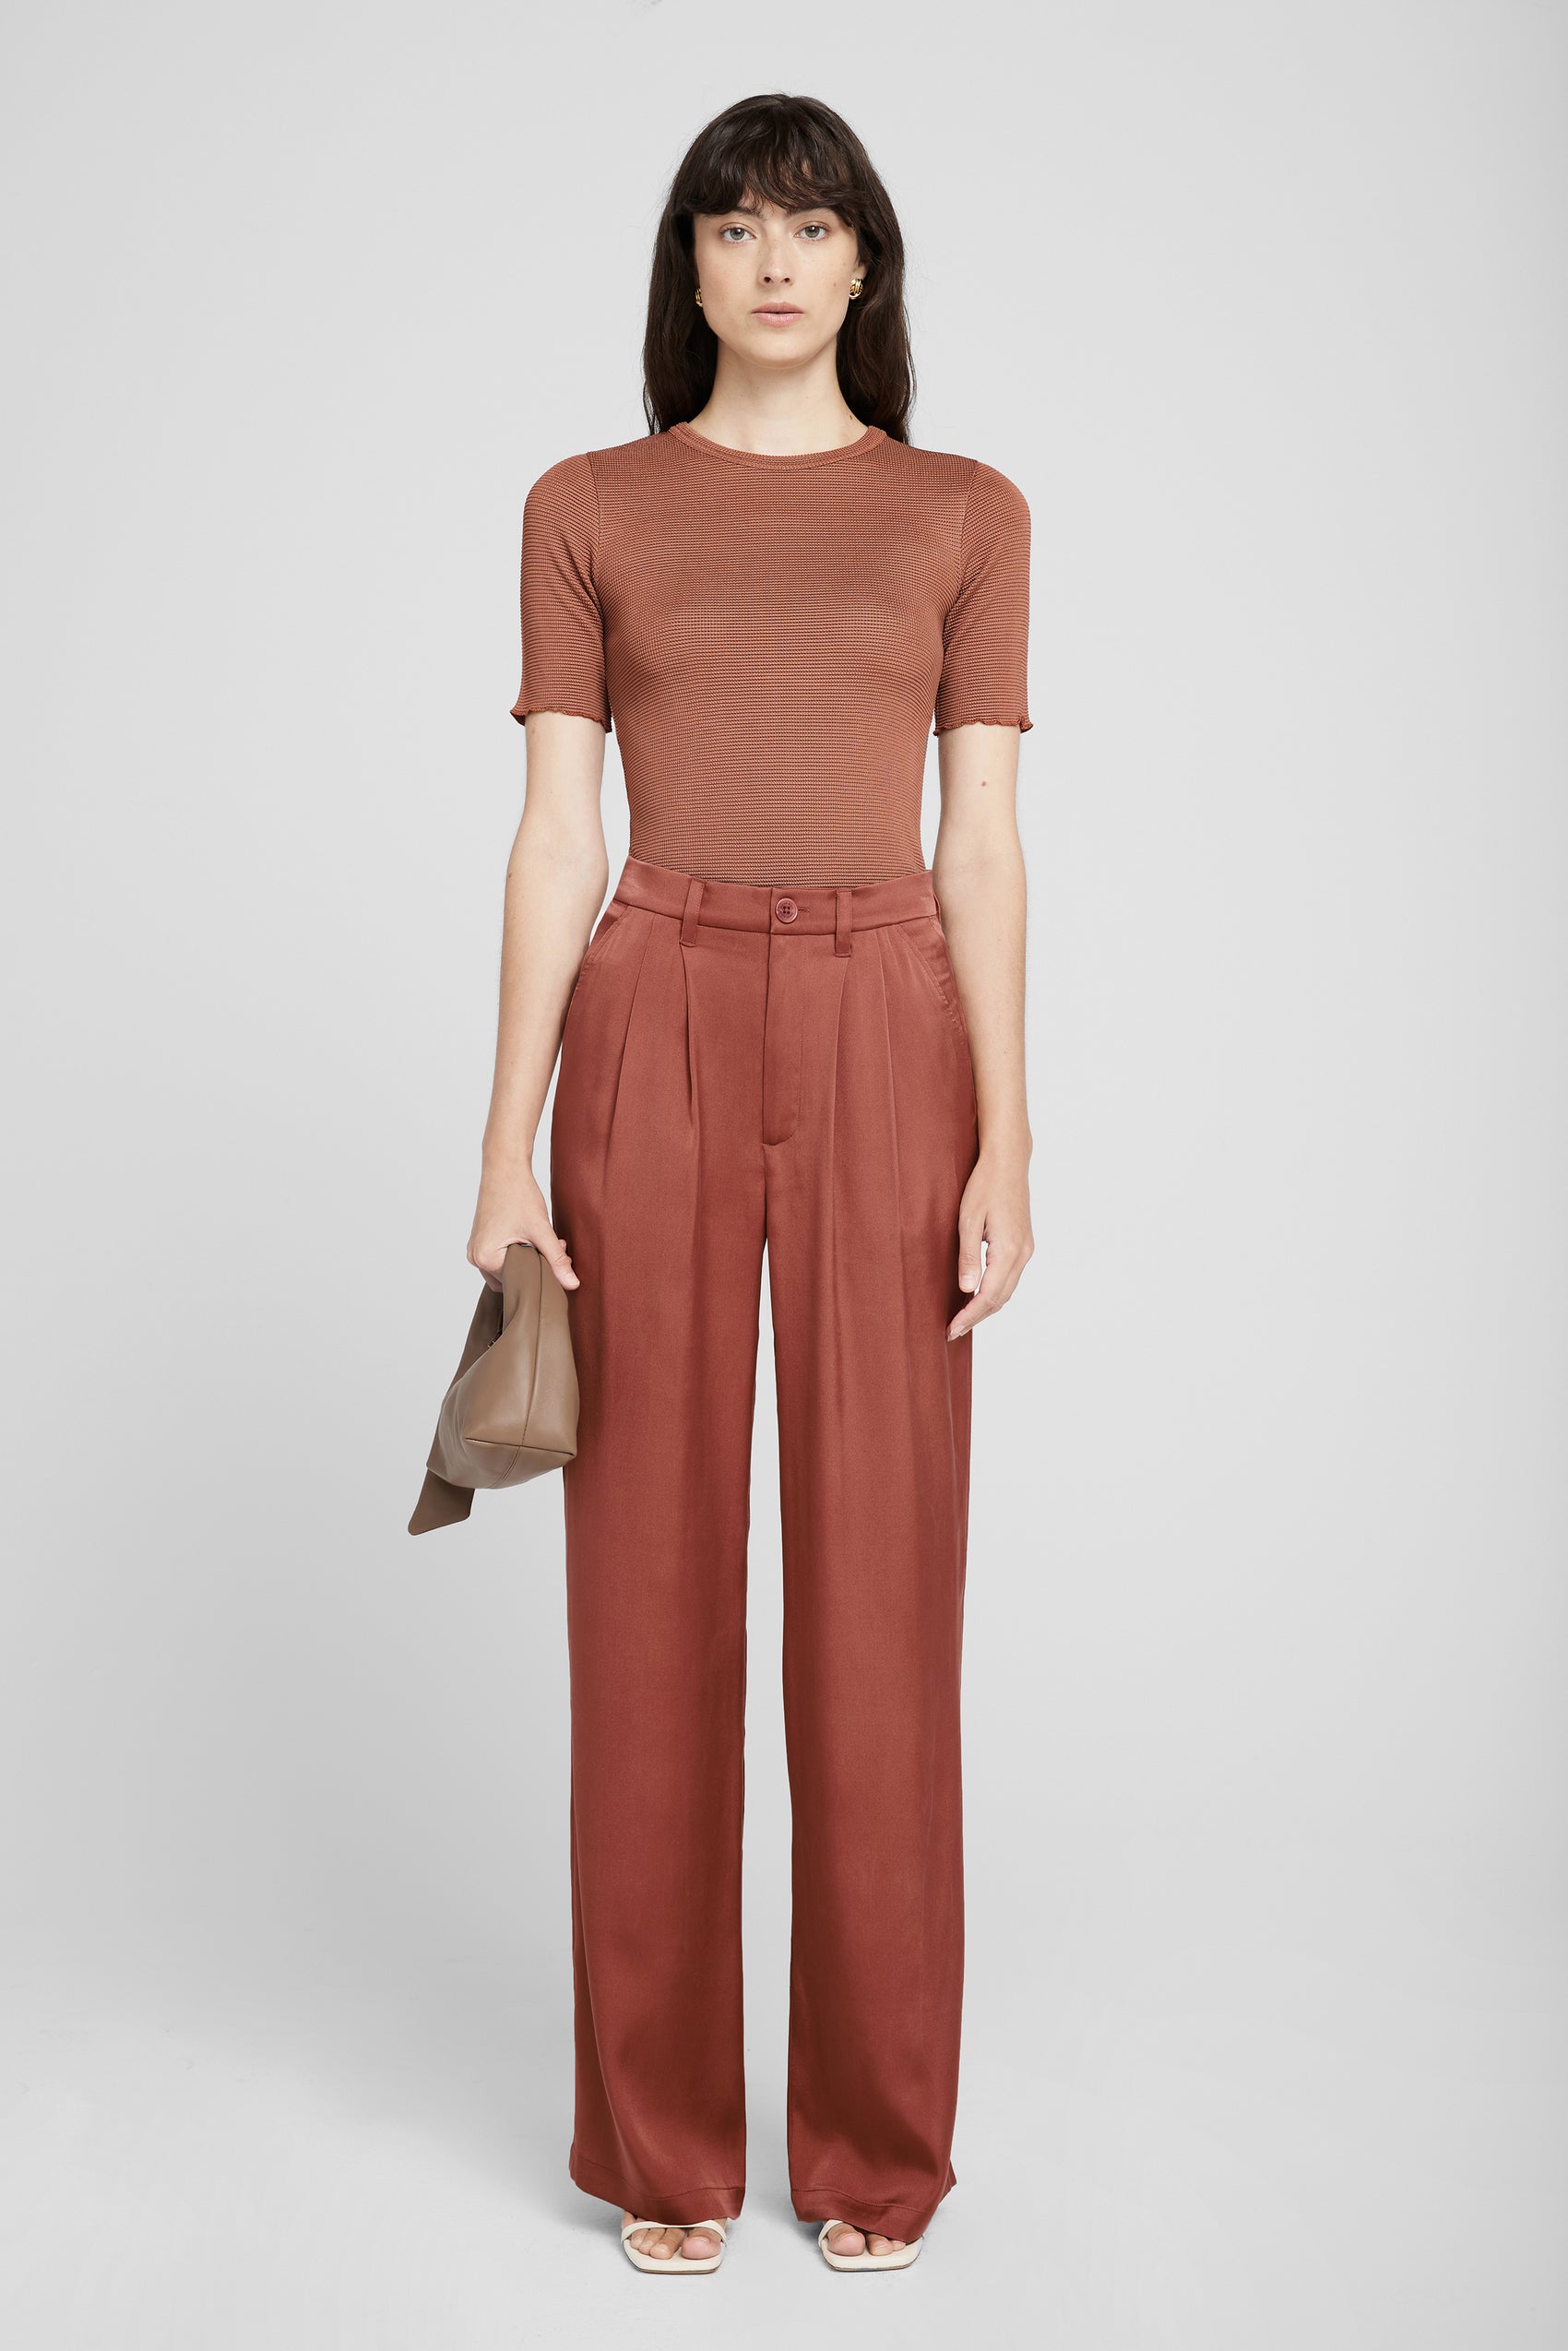 ANINE BING Carrie Pant - Terracotta Silk - On Model Front